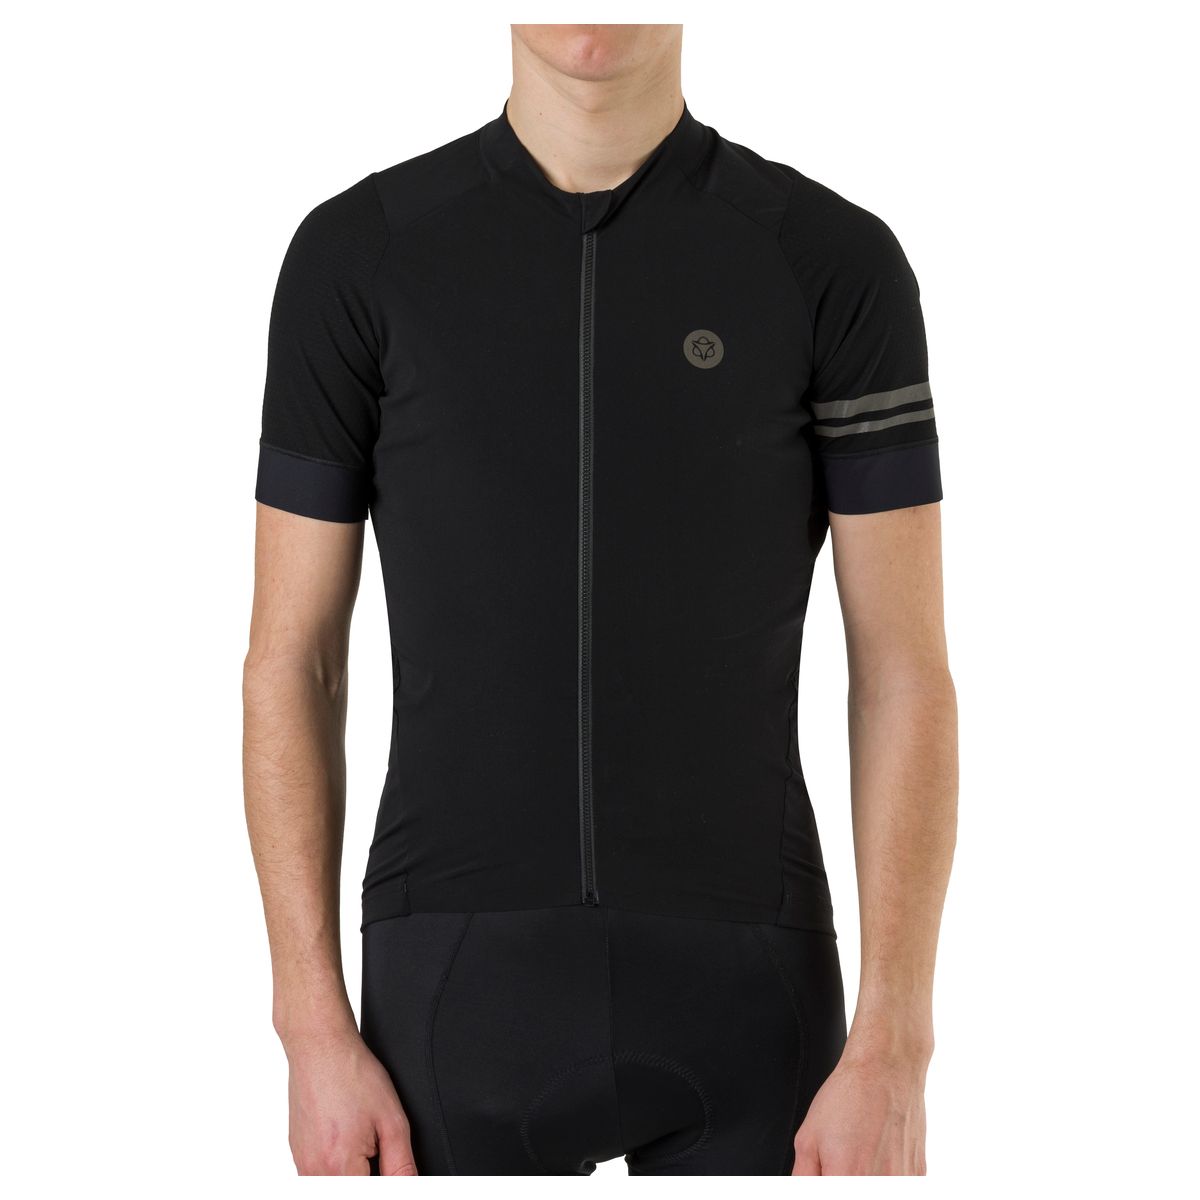 Woven Maillot II Premium Hombres fit example